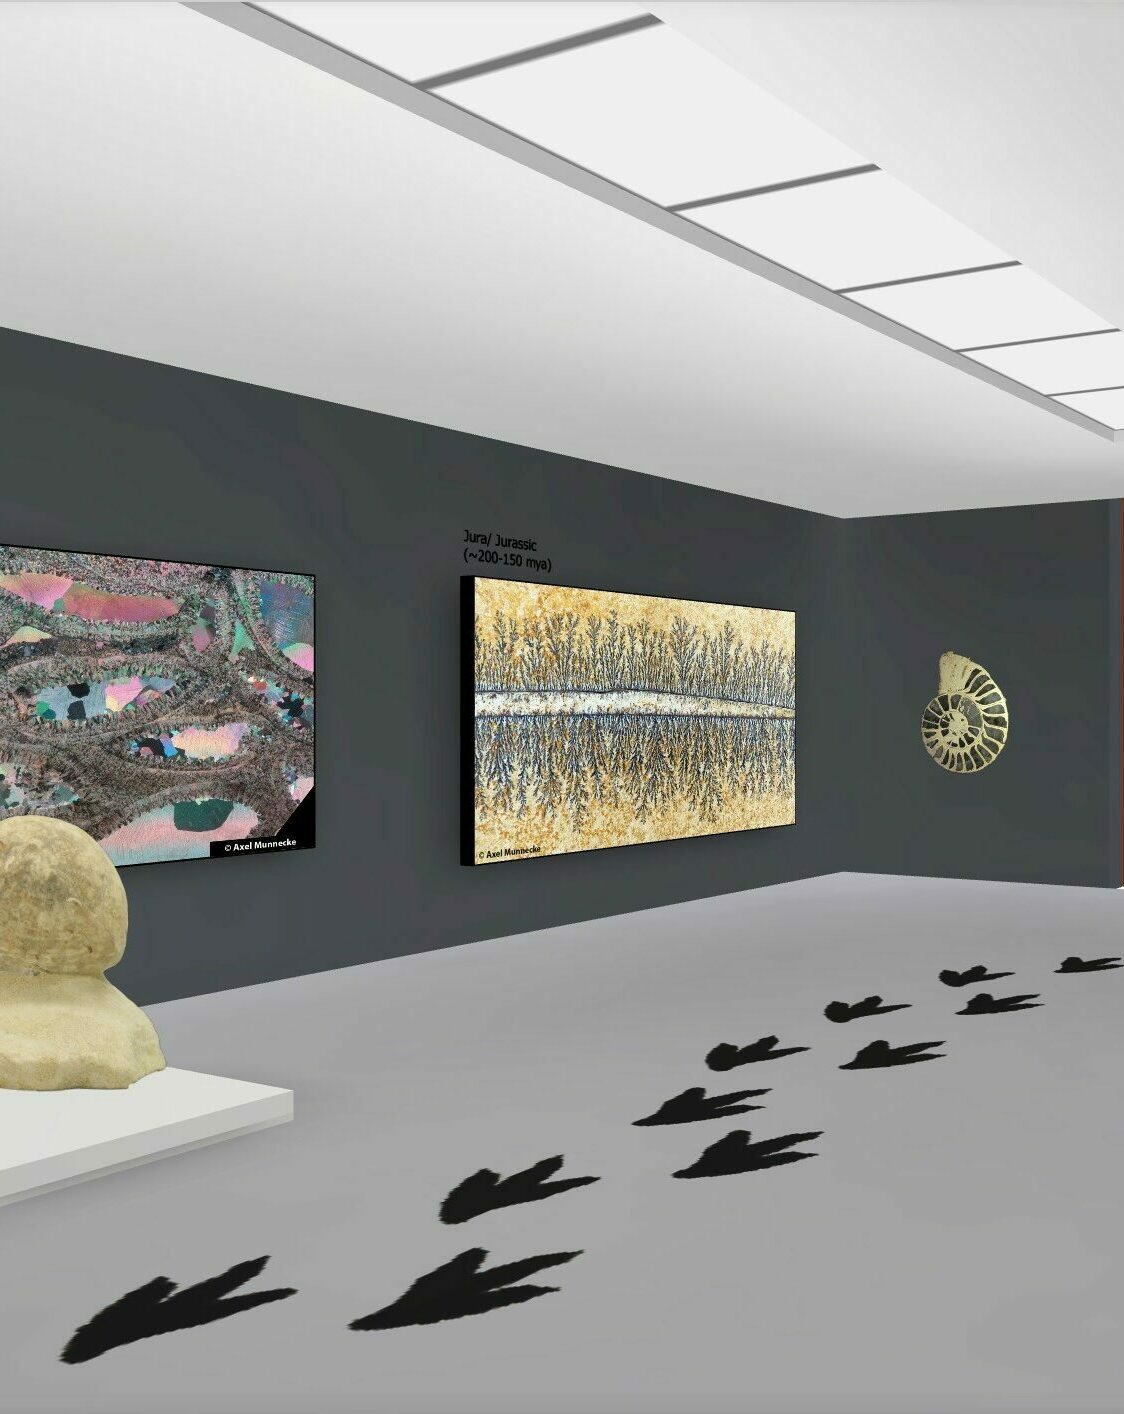 Virtual museum and exhibitions